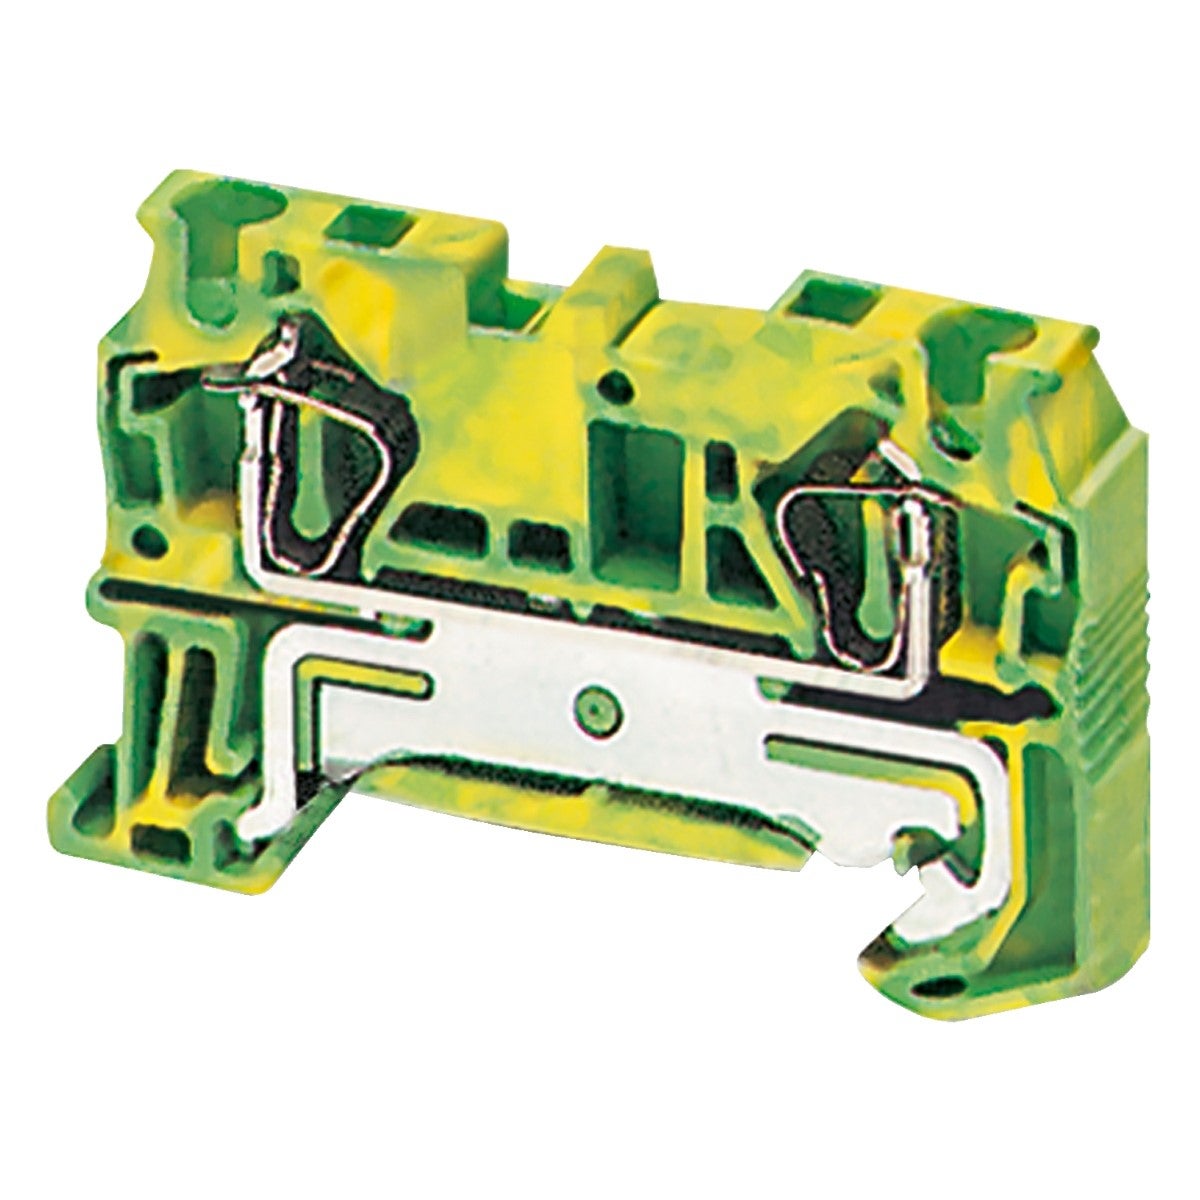 Terminal block, Linergy TR, spring type, protective earth, 2 points, 4mm�, green-yellow, set of 50